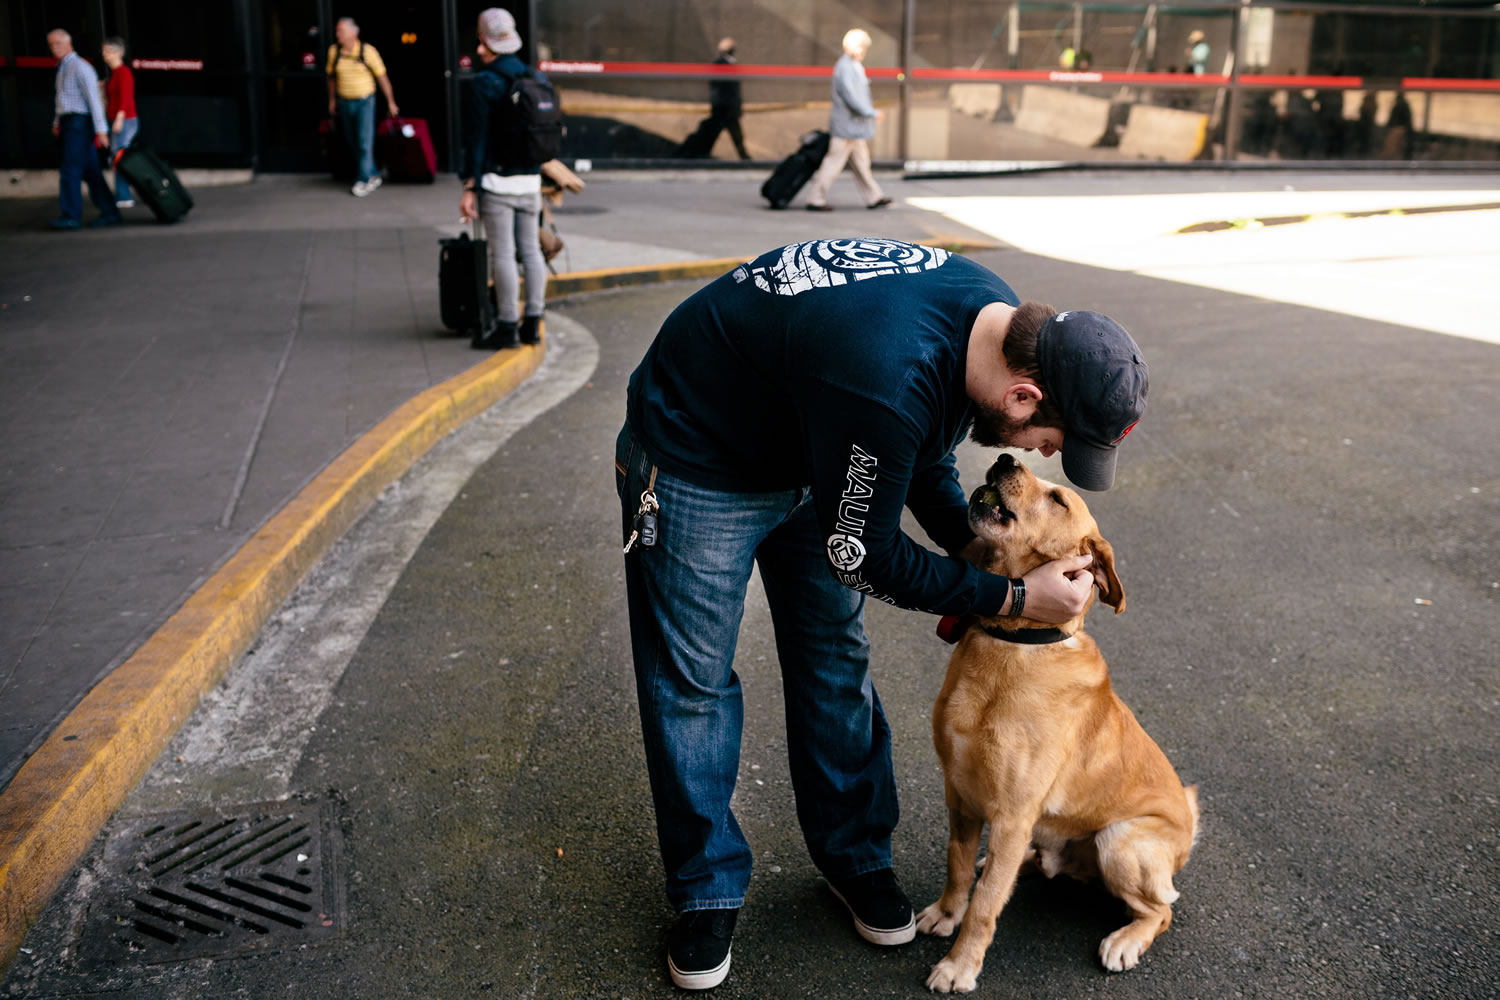 Photos by Jordan Stead /seattlepi.com
U.S. Marine Corps veteran Sgt. Deano Miller is reunited with military working dog Thor, a yellow Labrador whose first handler in Afghanistan Miller was, Thursday at Seattle-Tacoma International Airport in SeaTac.